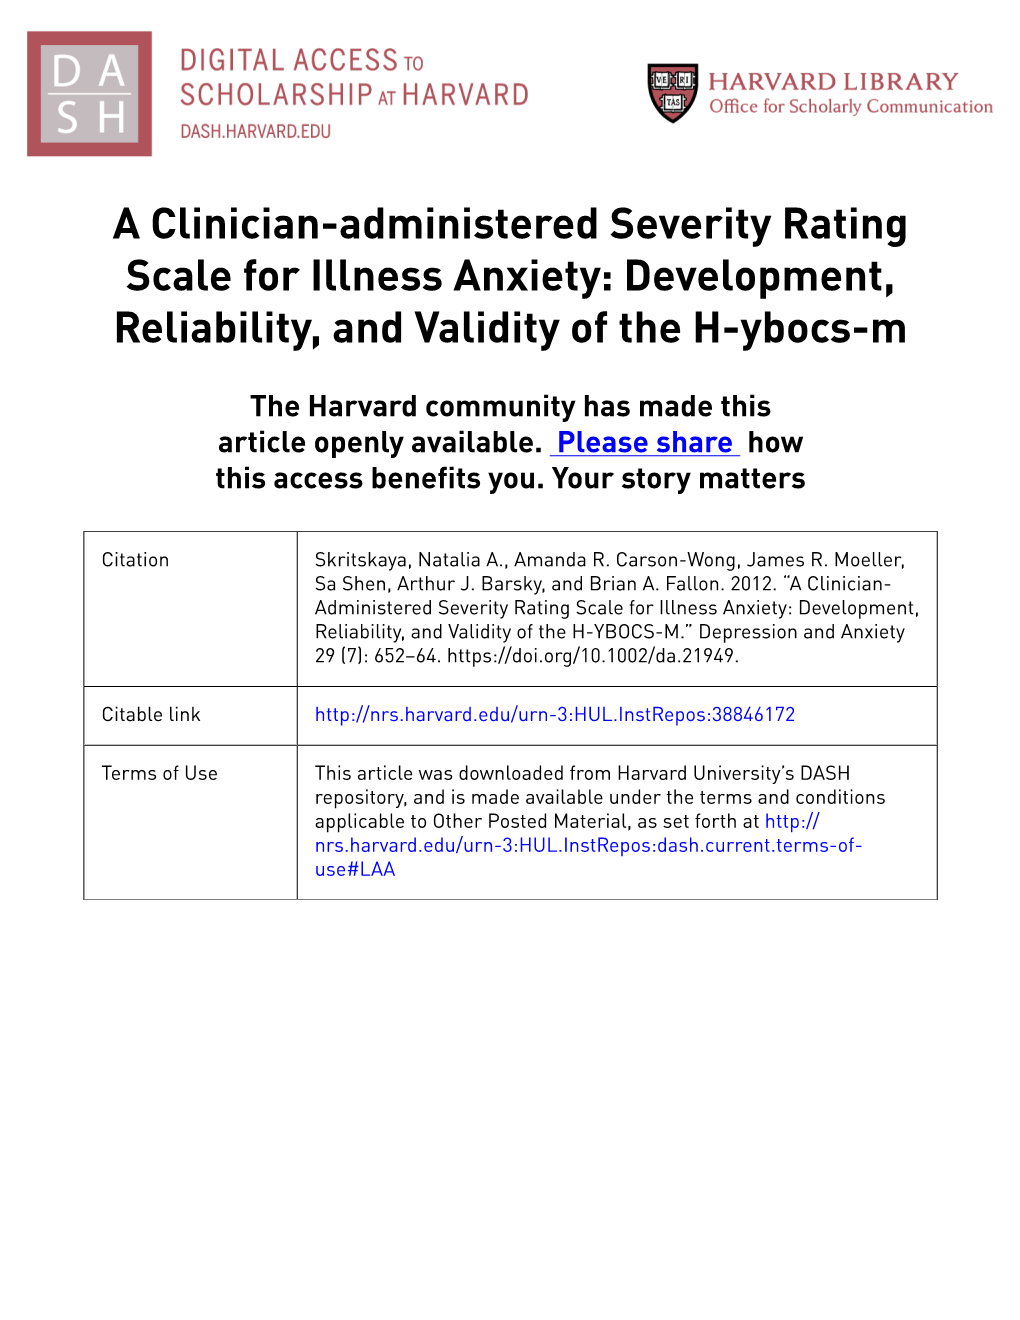 A Clinician-Administered Severity Rating Scale for Illness Anxiety: Development, Reliability, and Validity of the H-Ybocs-M